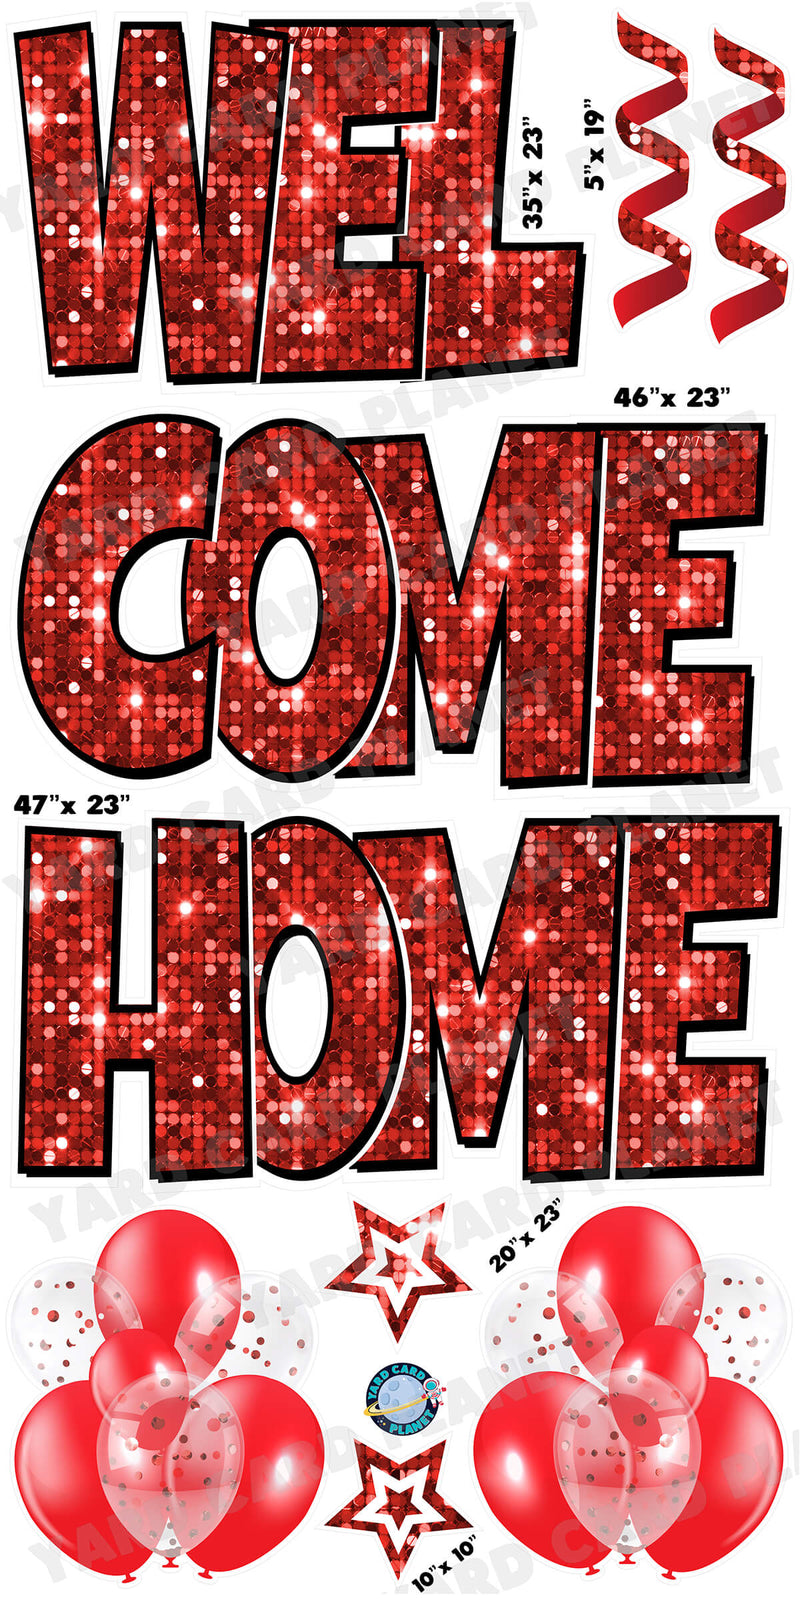 Large 23" Welcome Home Yard Card EZ Quick Sets in Luckiest Guy Font and Flair in Red Sequin Pattern